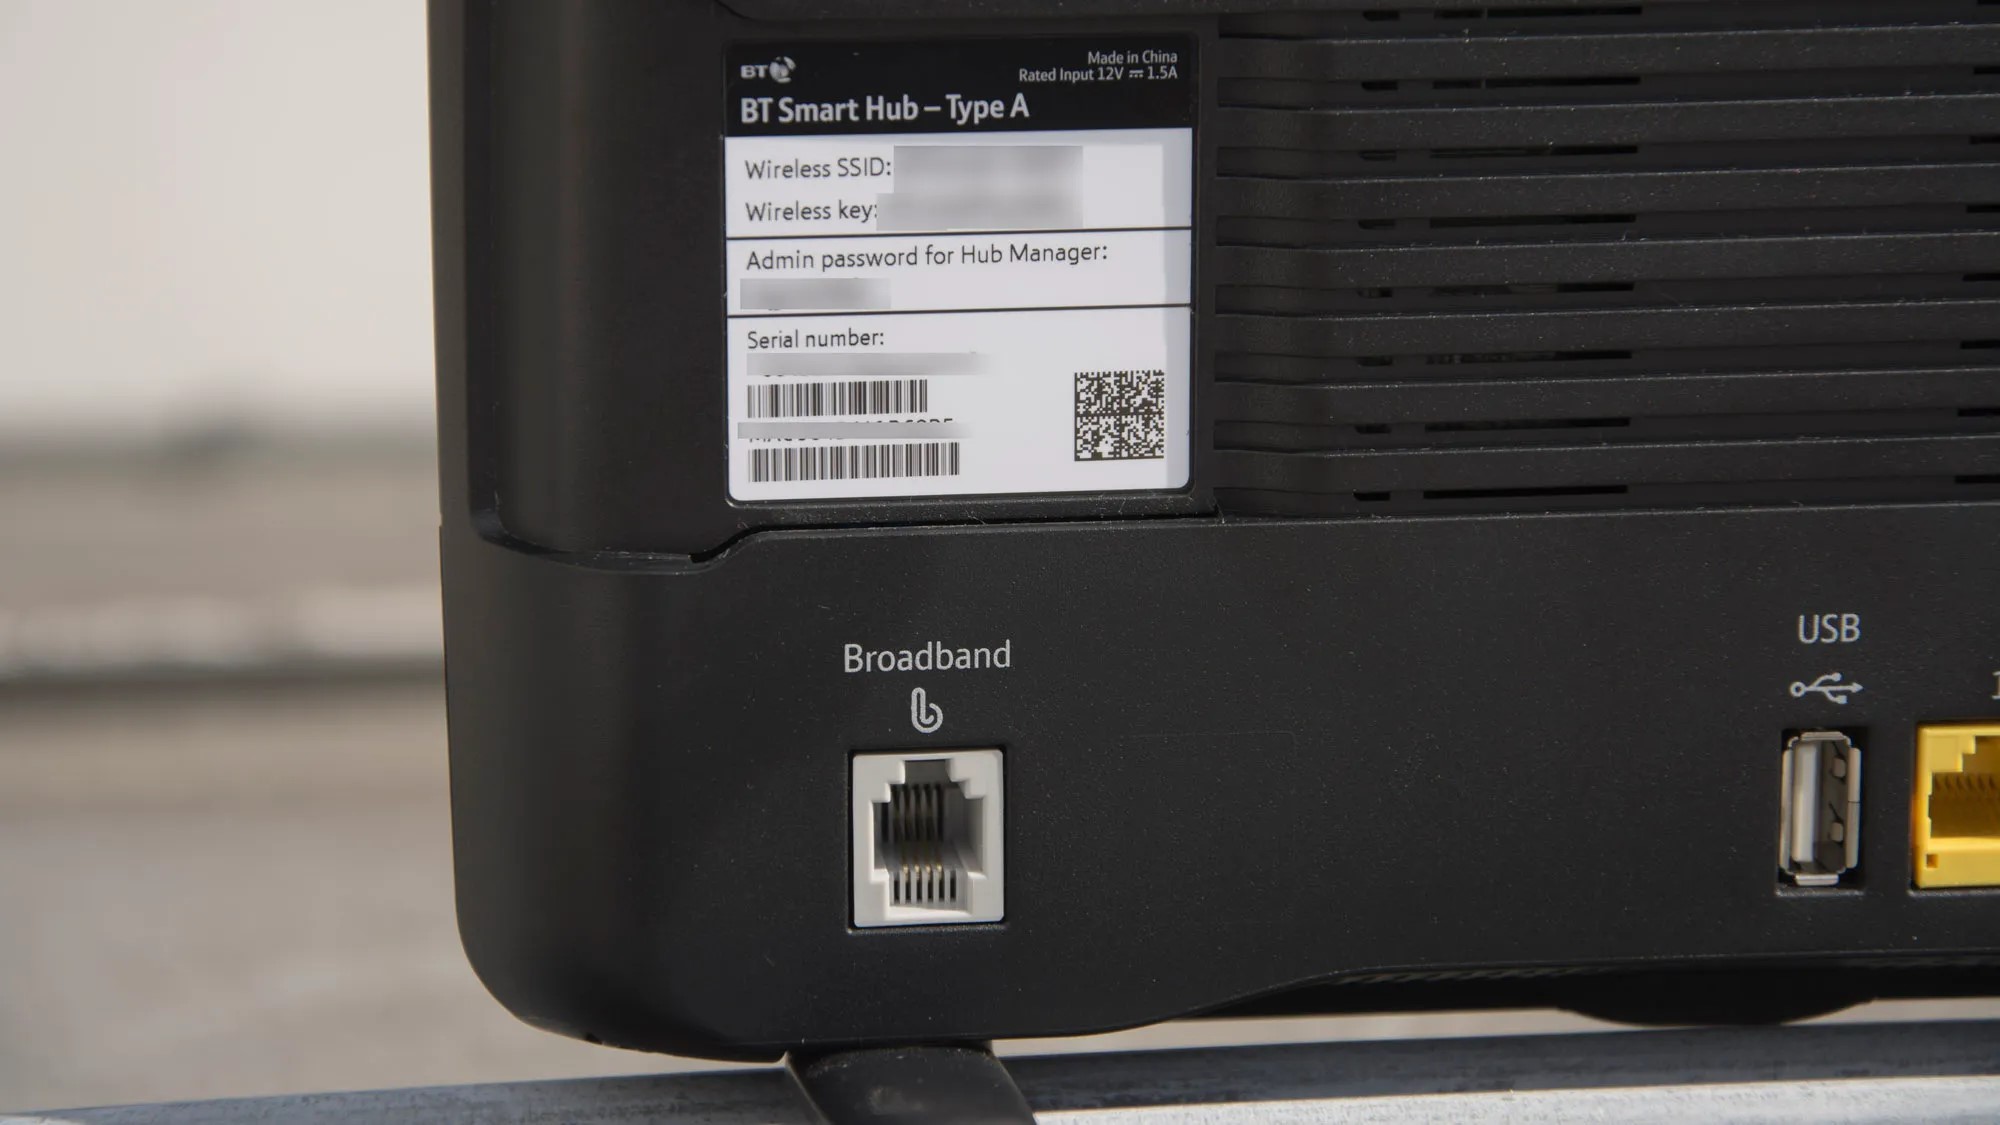 How To Find Ssid On Wi-Fi Router